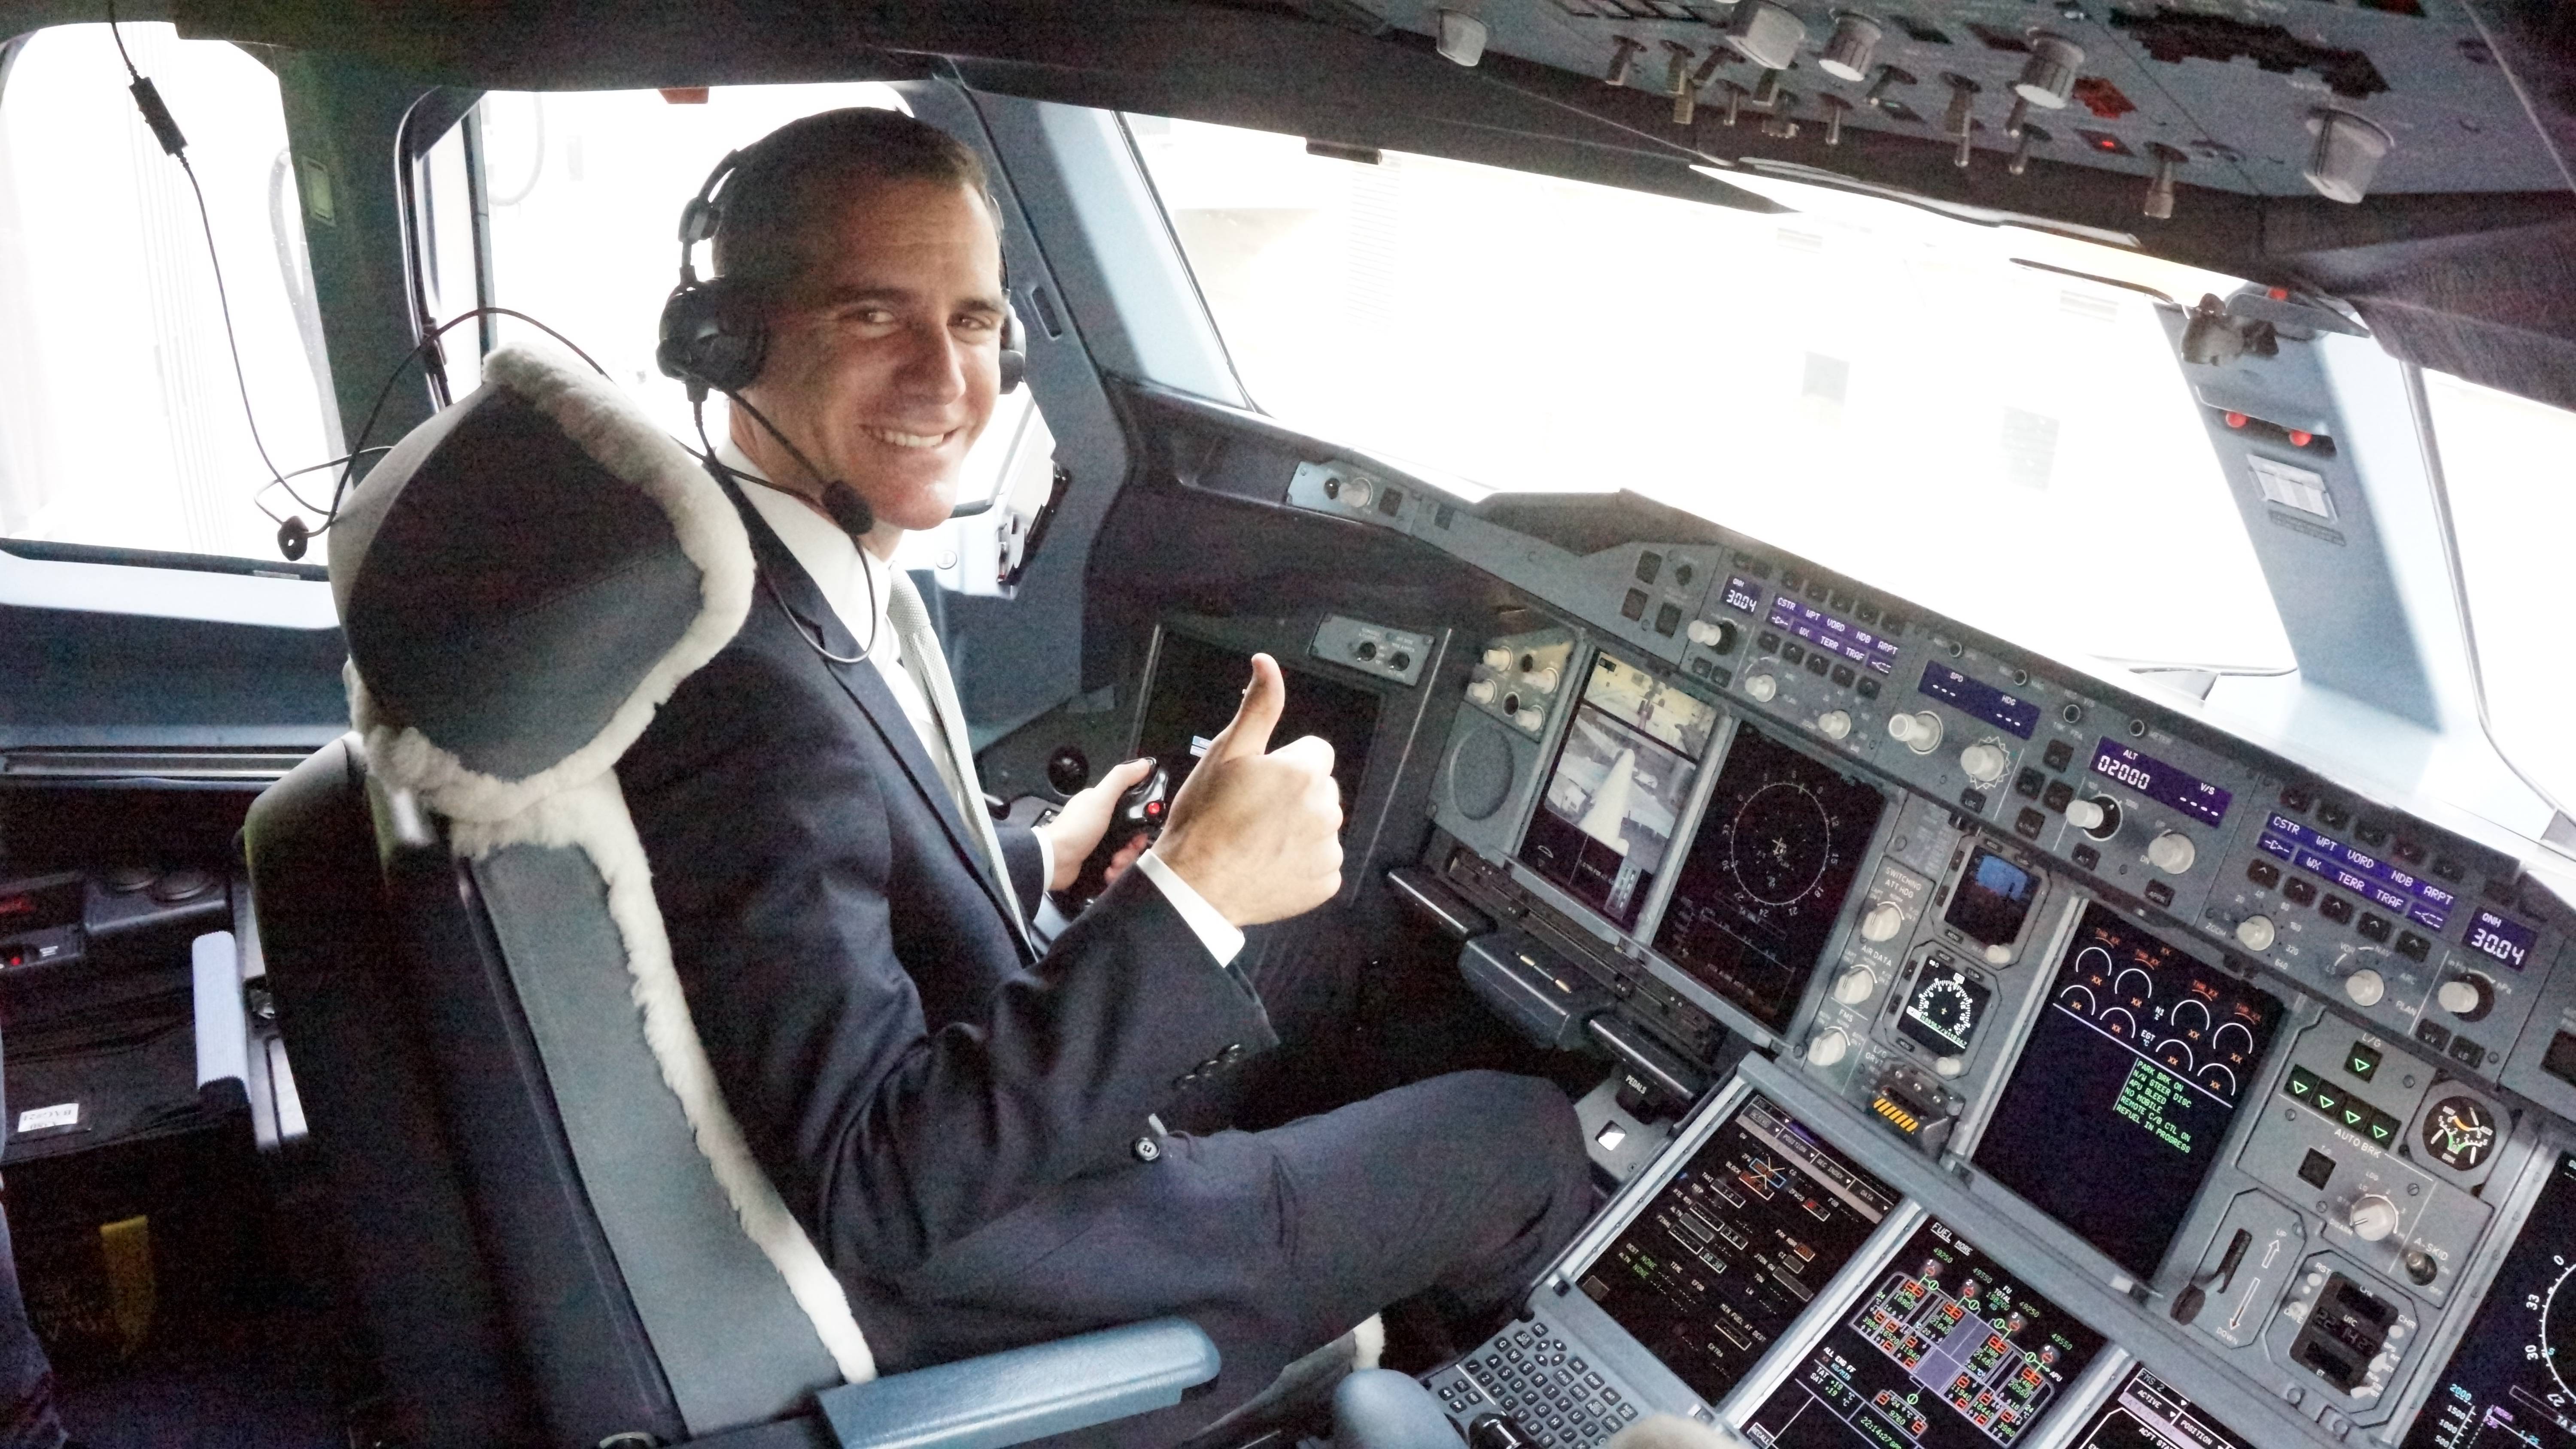 Los Angeles Mayor Eric Garcetti Experiences the Captain's Seat on the Emirates' A380 in Los Angeles